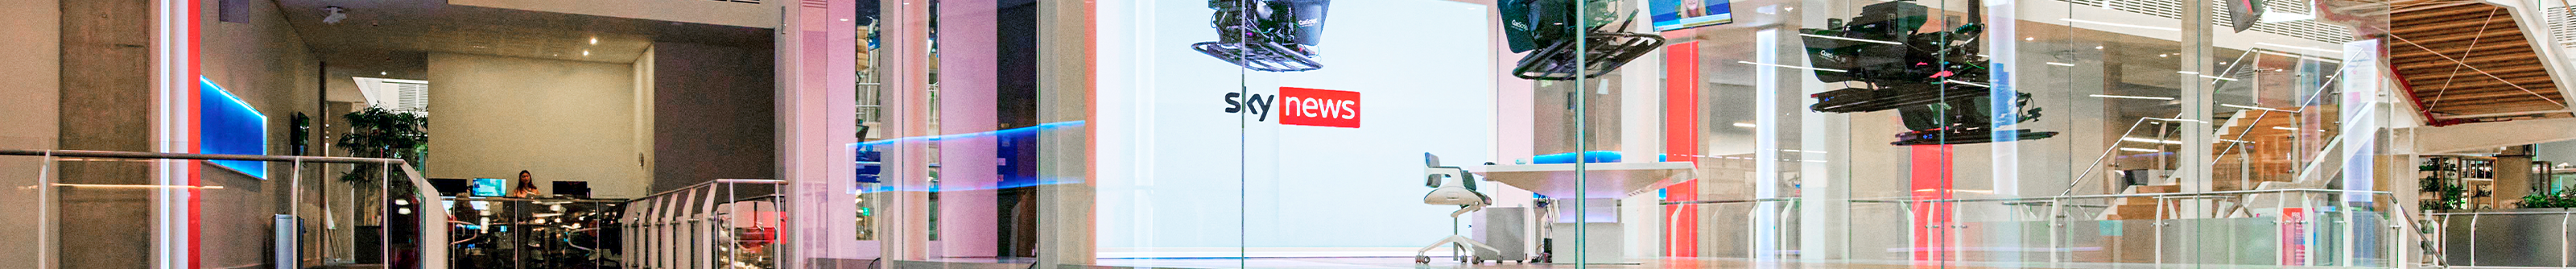 Sky News Design and Creative's profile banner